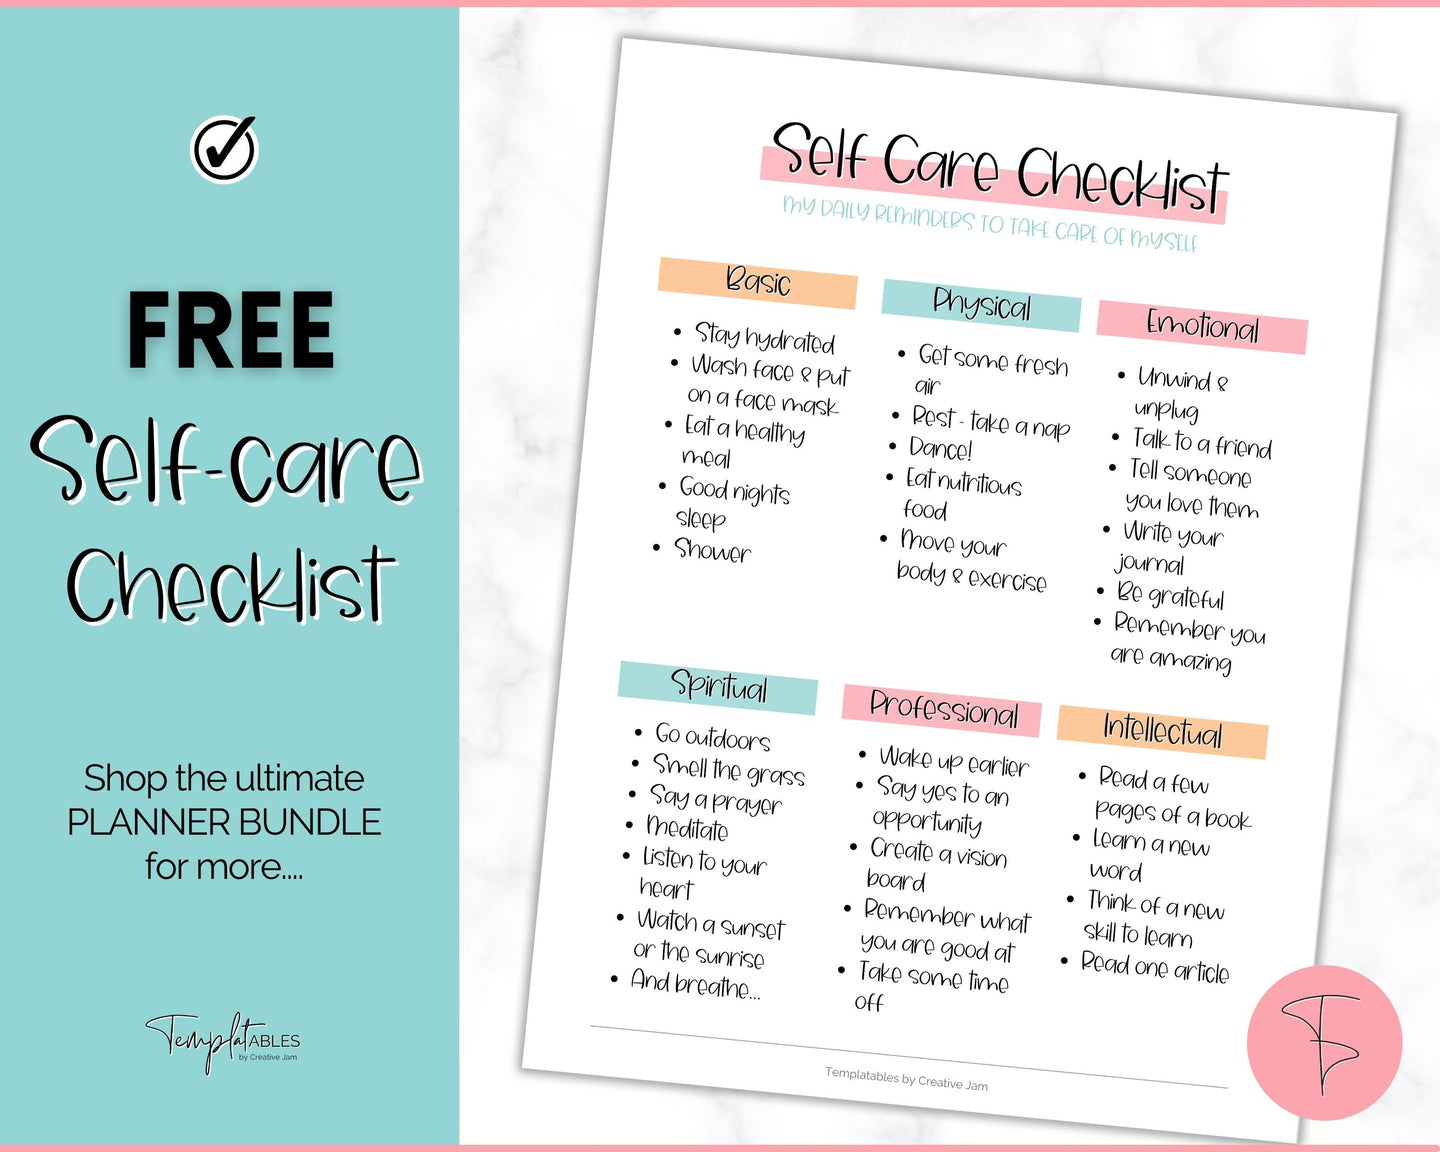 FREE - Self Care Checklist, Self-Care Planner & Selfcare Journal Tracker | Wellness Planner, Daily Wellbeing, Mindfulness, Mental Health Kit | Colorful Sky